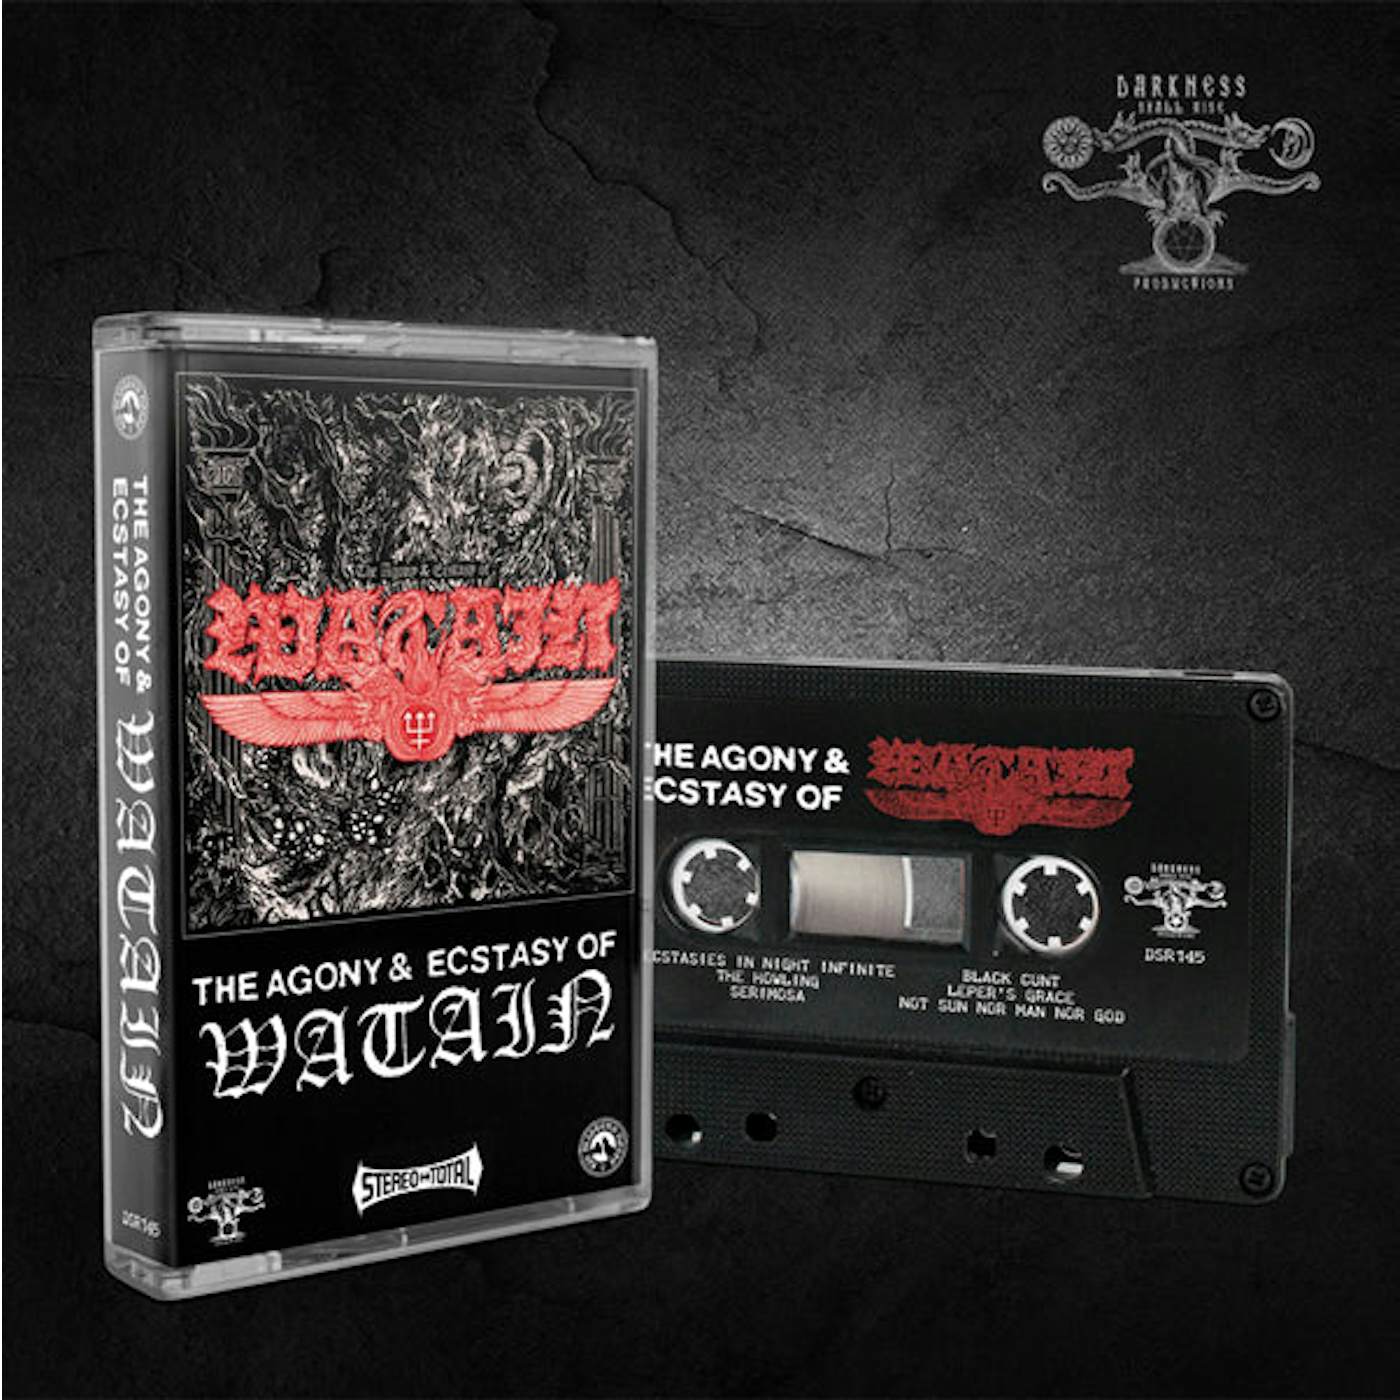 Watain Music Cassette - The Agony & Ecstasy Of Watain